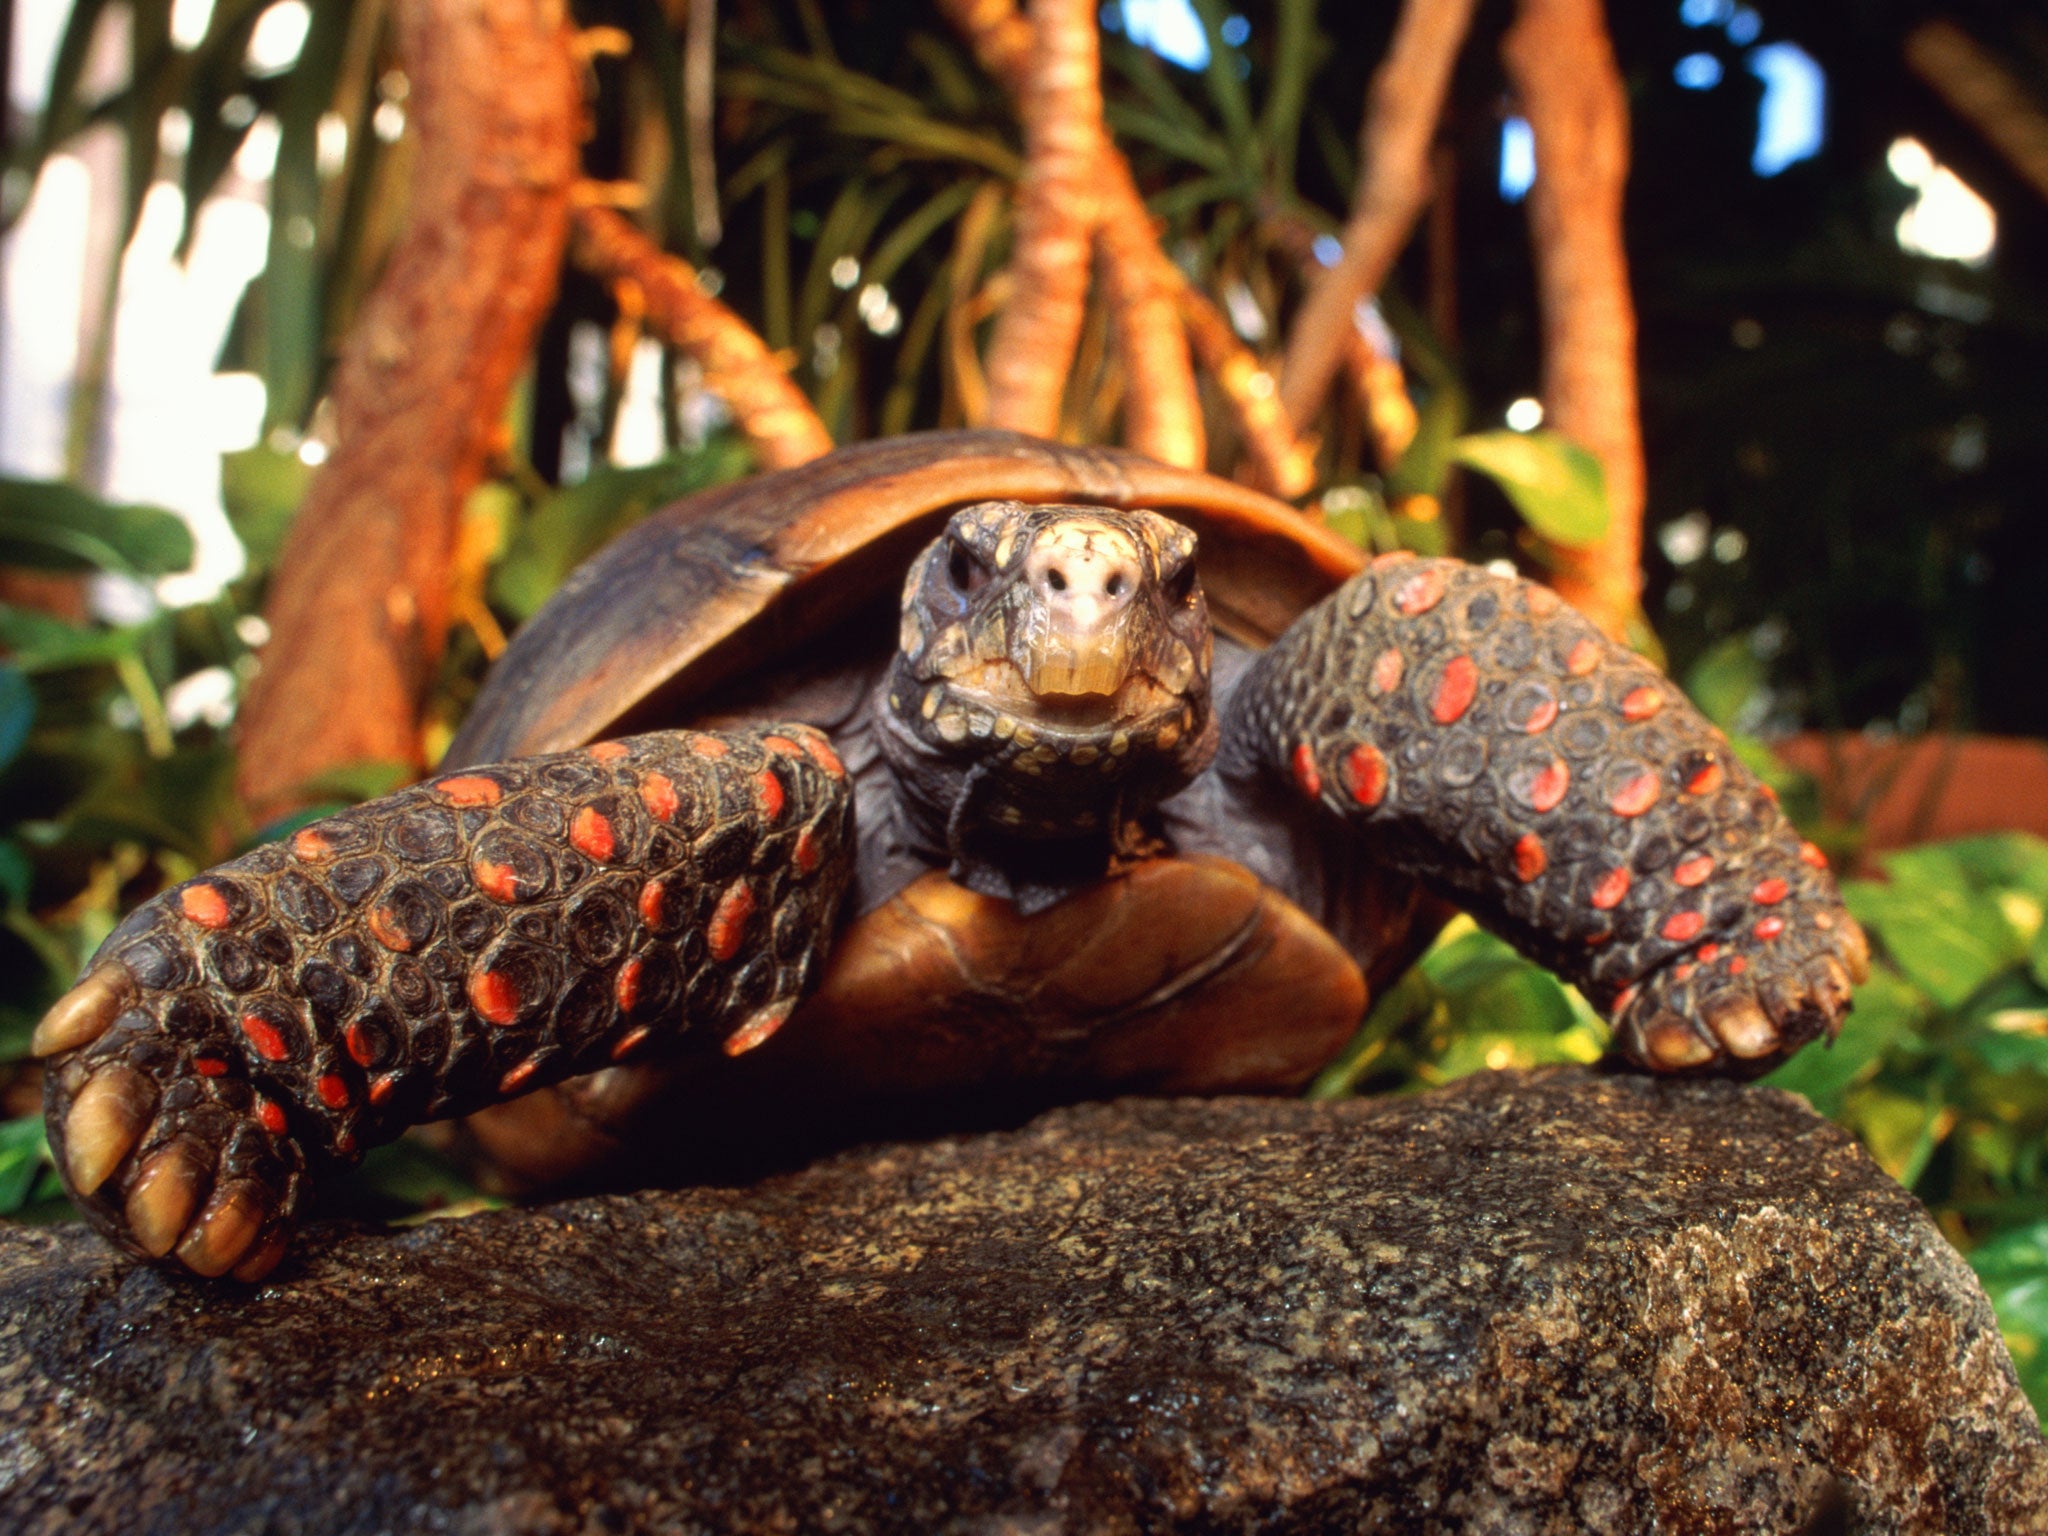 Red-footed tortoises like Manuela can go without food for long periods of time